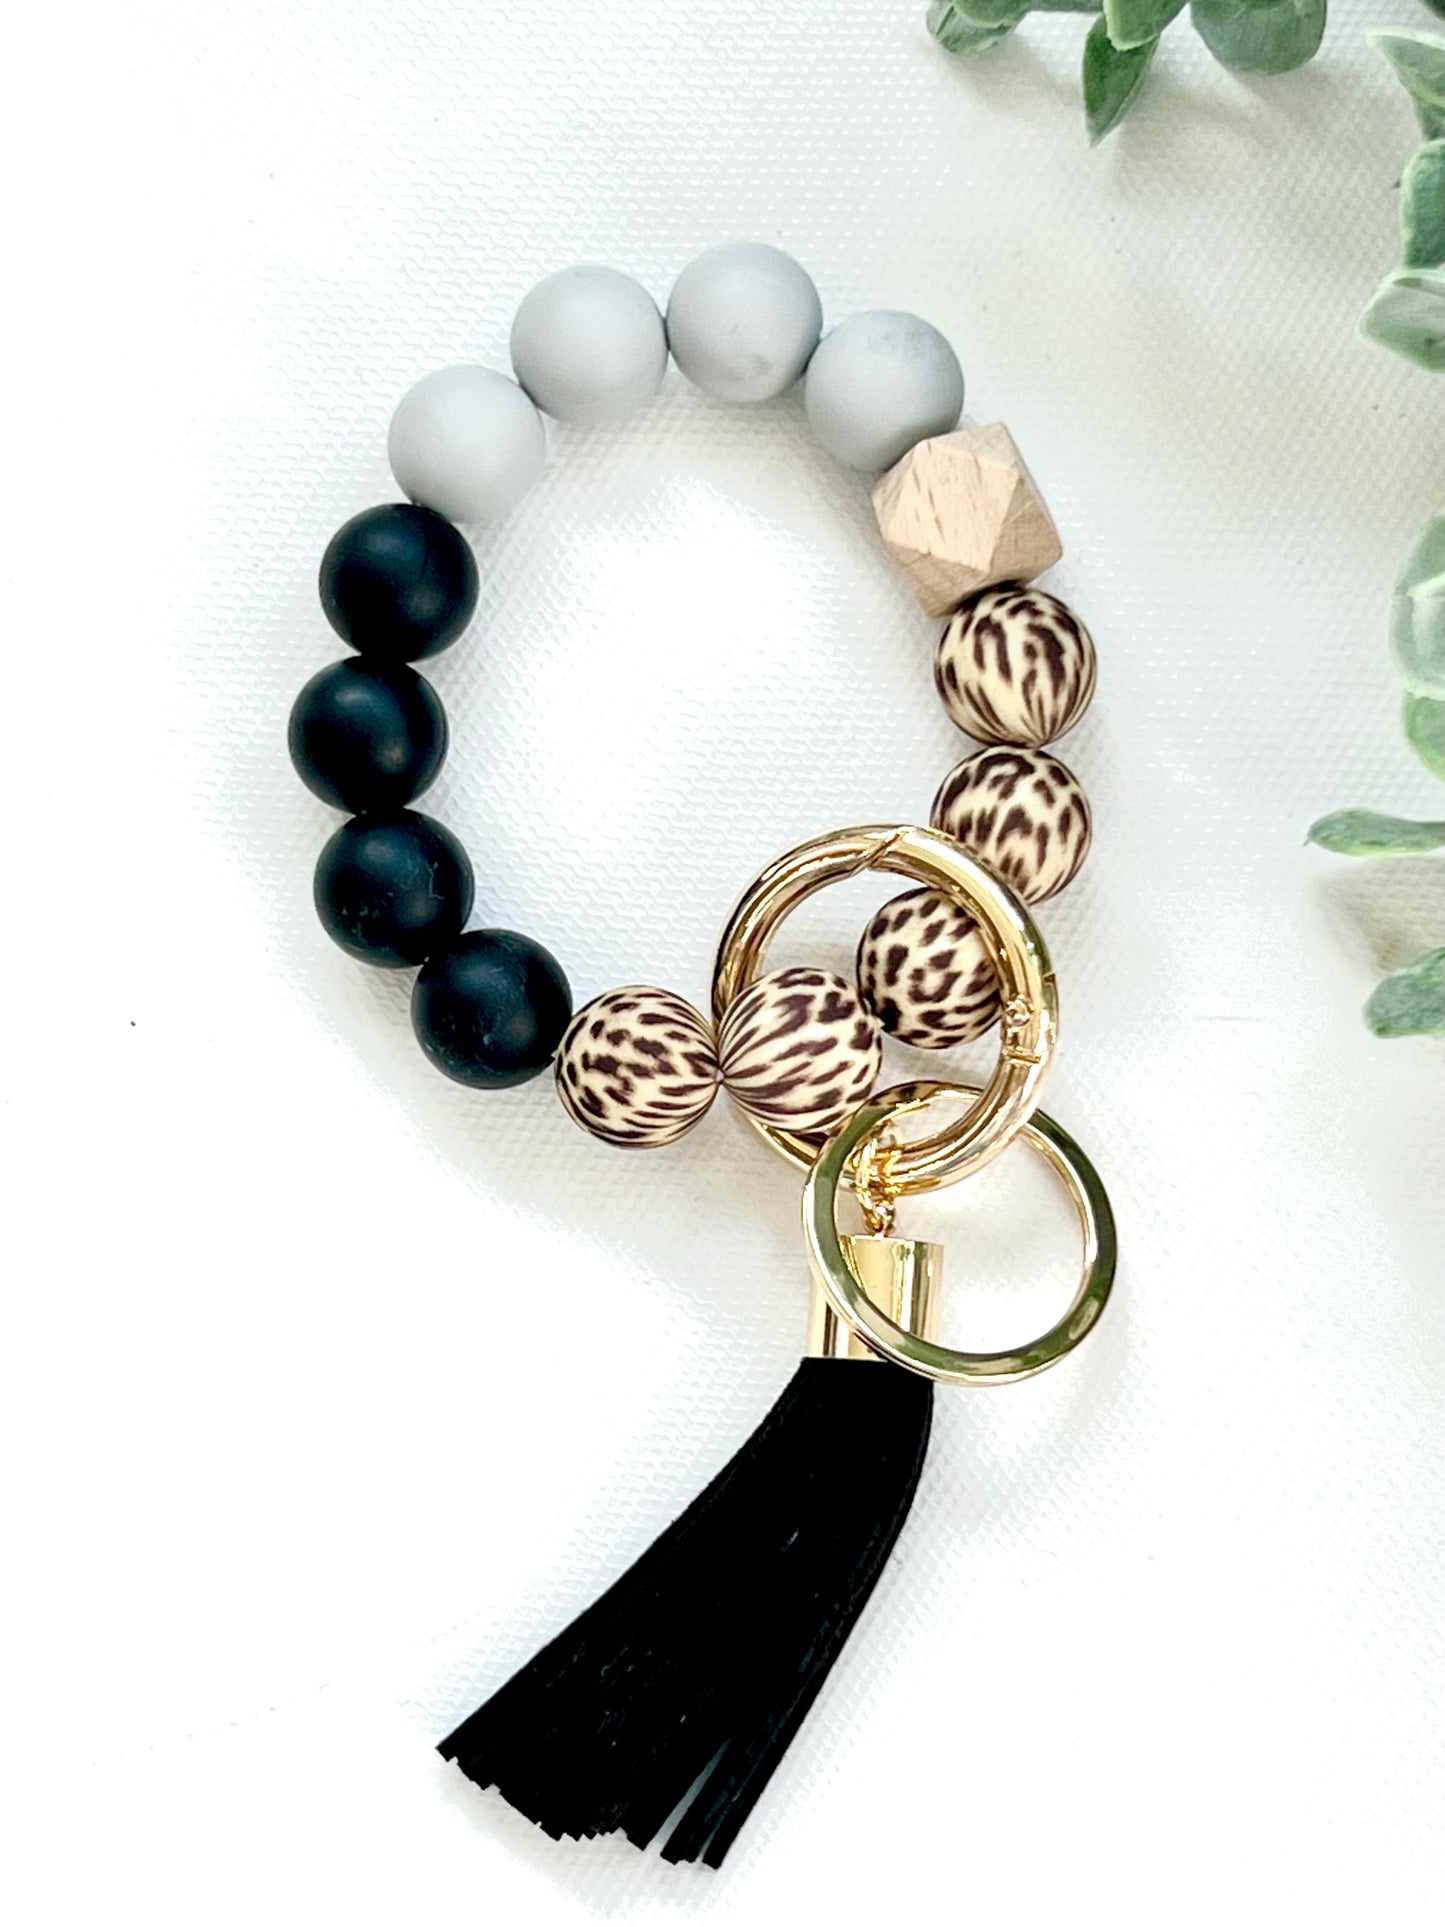 Silicone & wood beads with a leather tassel.